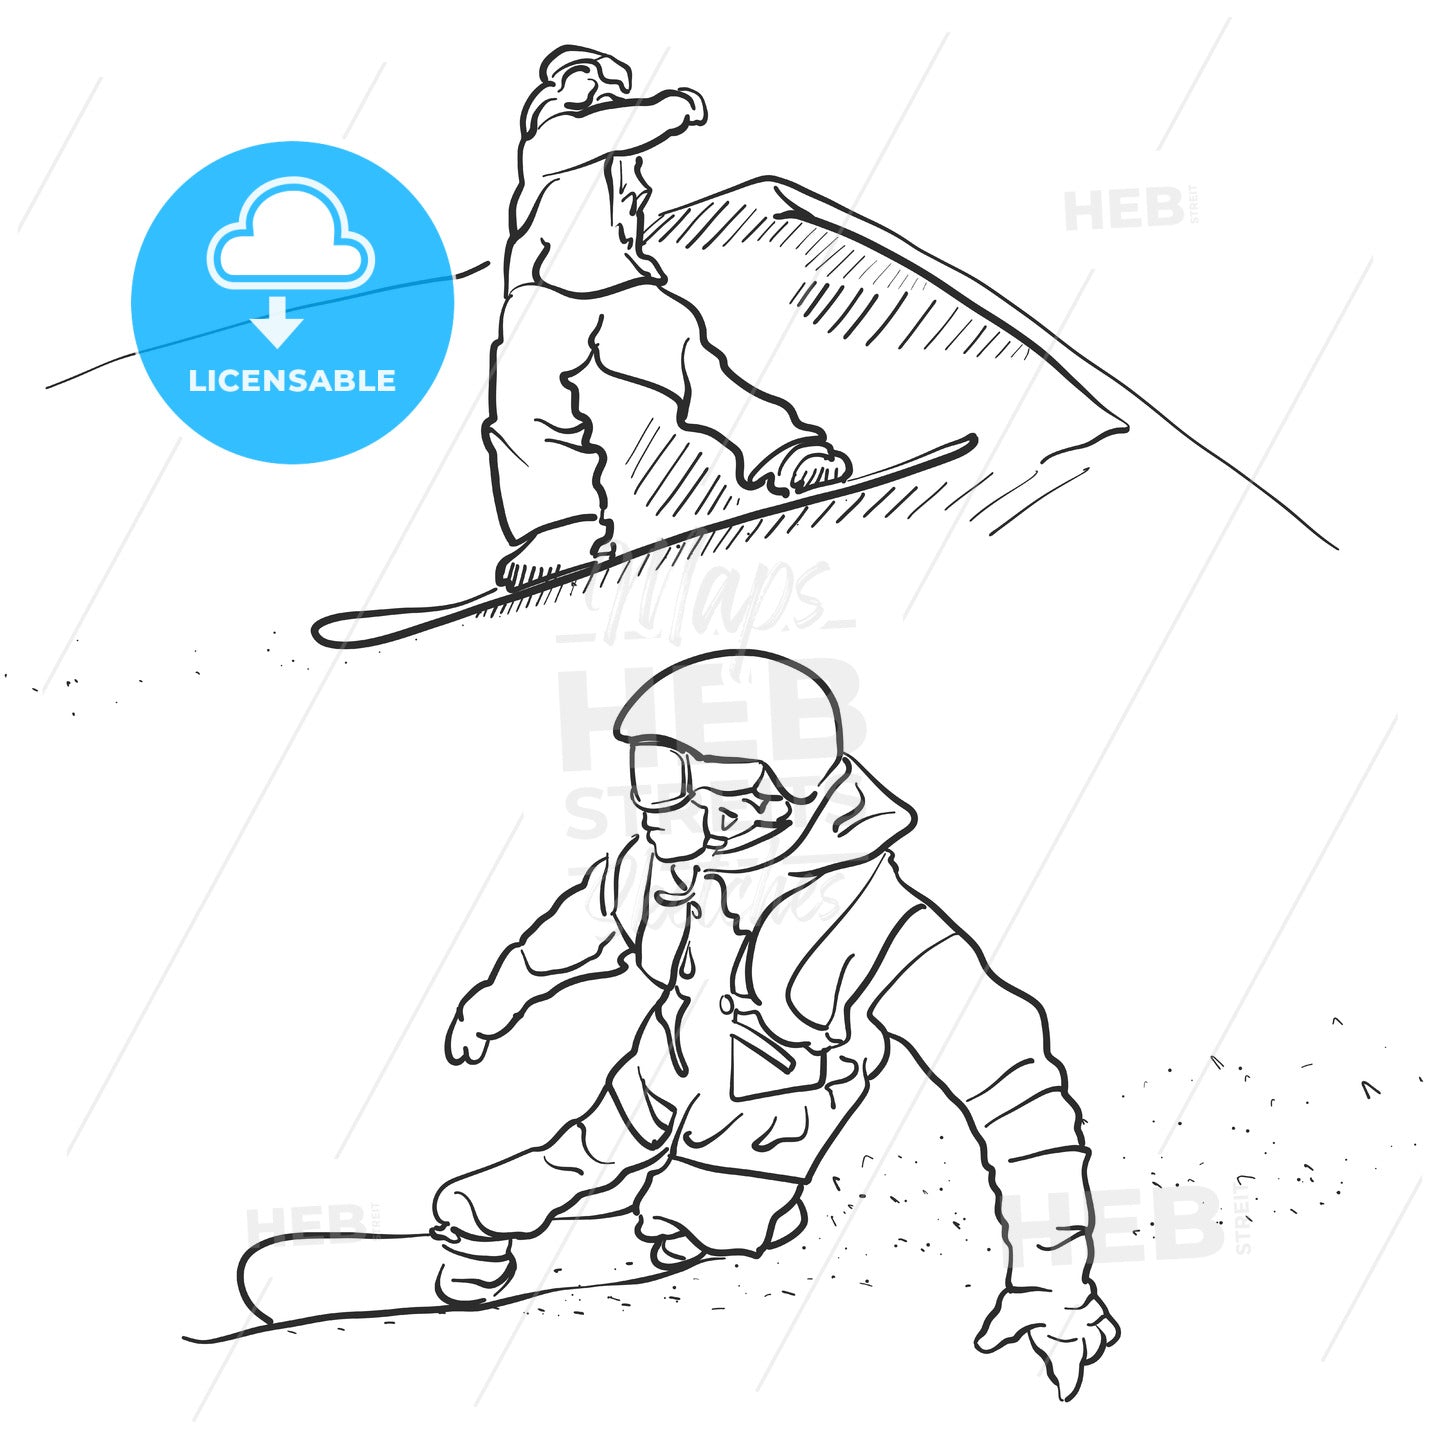 Premium Vector | Exercise people with food and equipment | Doodle art  designs, Doodle illustration, Doodle art